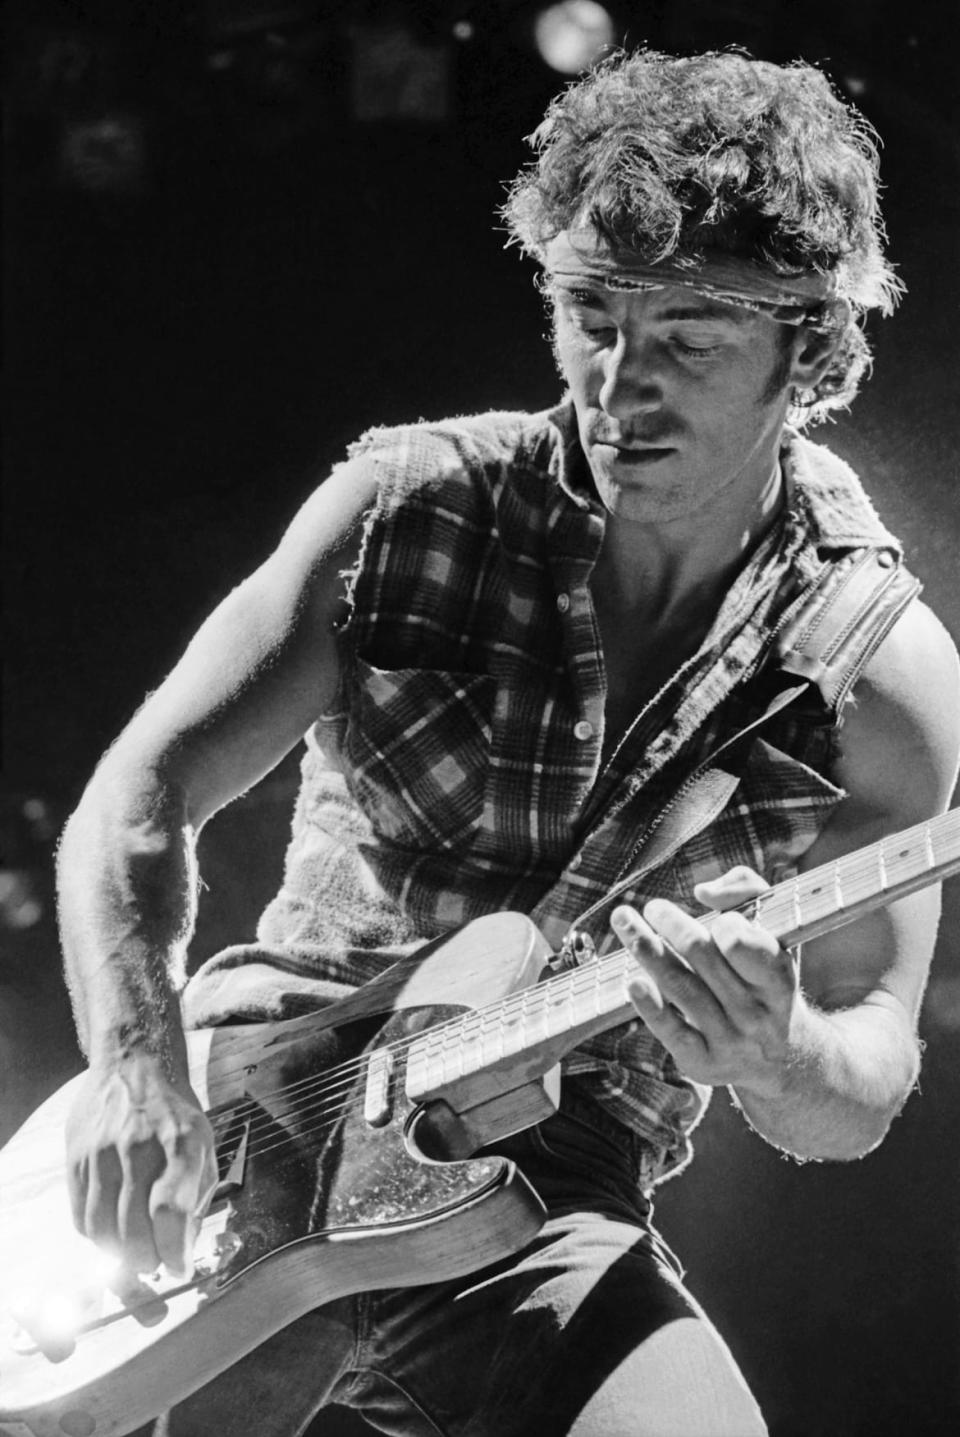 <div class="inline-image__caption"><p>Bruce Springsteen on stage at the Richfield Coliseum in Ohio, USA, on July 9, 1984.</p></div> <div class="inline-image__credit">Janet Macoska</div>